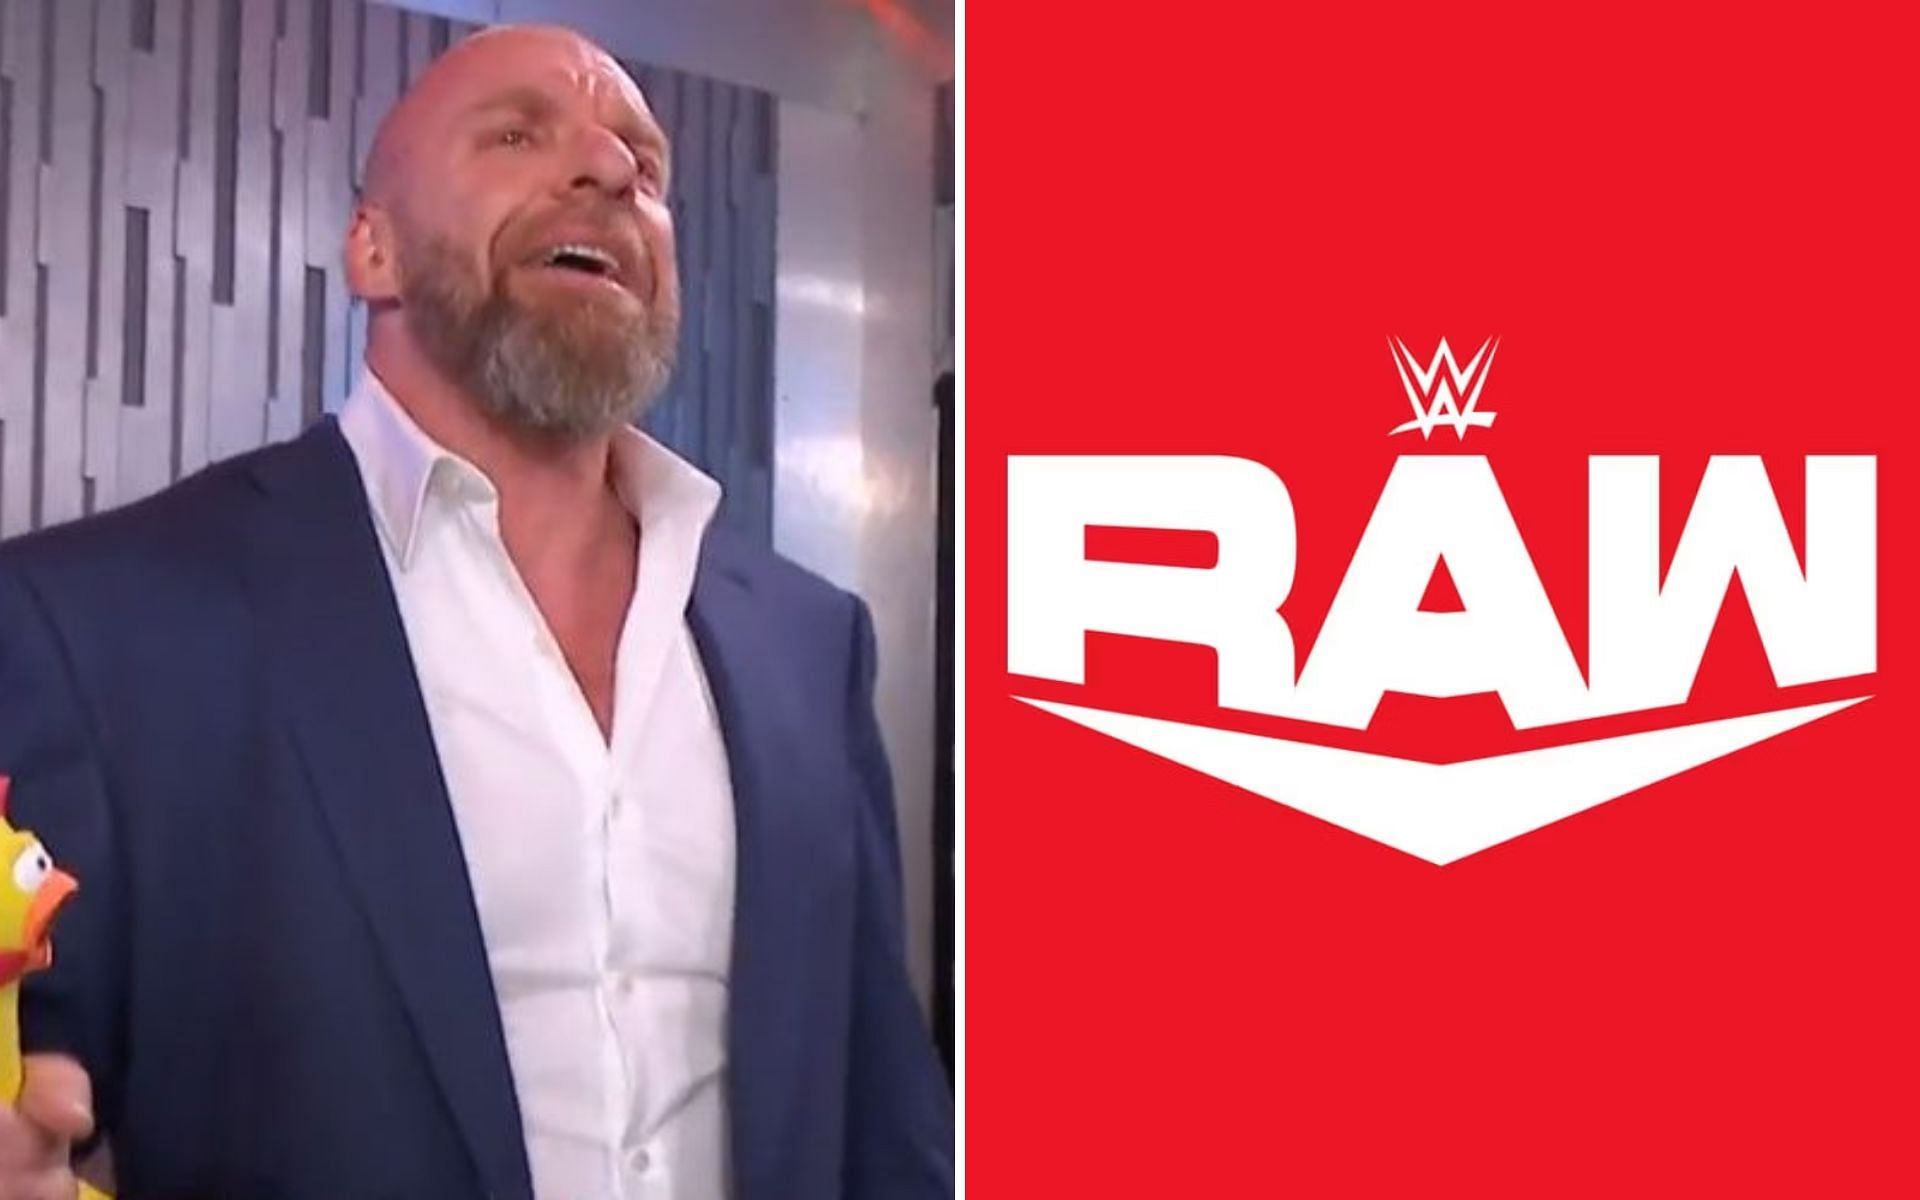 WWE has been thriving under Triple H